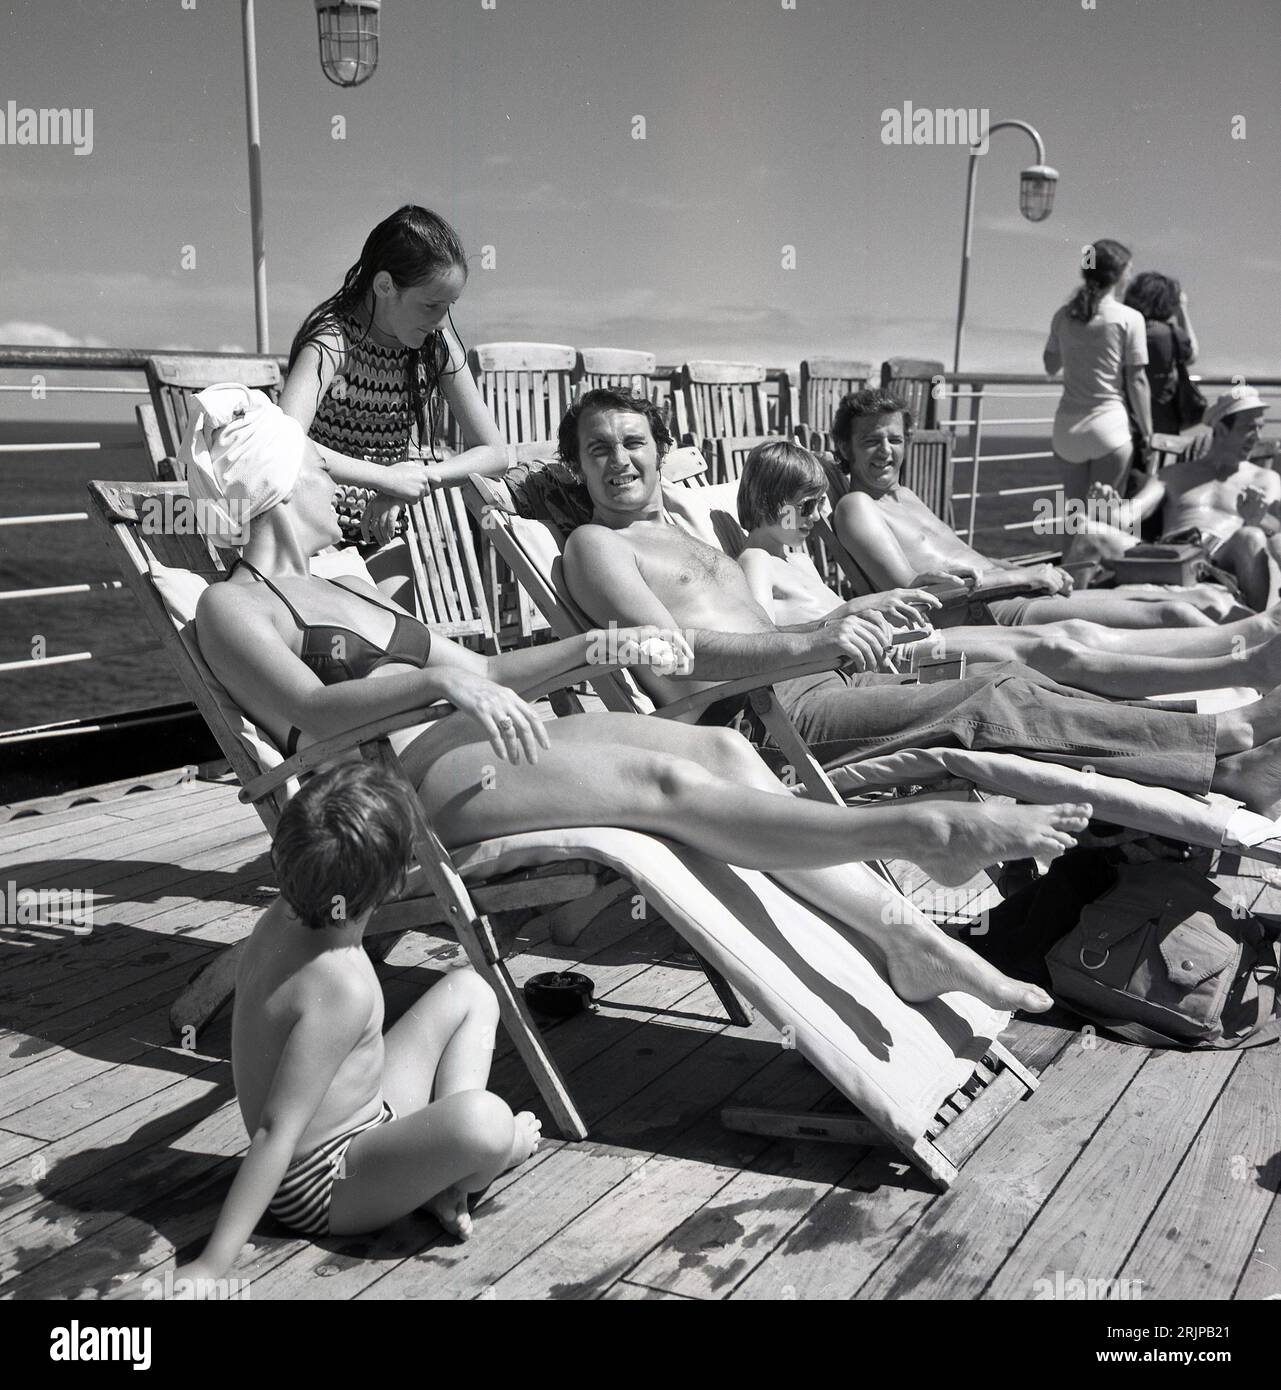 circa late 1960s, early 70s... historical, a family in swimsuits relaxing in deckchairs outside on the deck of the cruise ship, MS Sagafjord, a luxury ocean-liner of the era. Launched in 1965 as a trans-atlantic cruise ship, after various changes of ownership including sailing under the Cunard flag, and being renamed the Saga Rose in 1997, she was scrapped in 2010, when new safety measures meant the need for extensive upgrades. Stock Photo